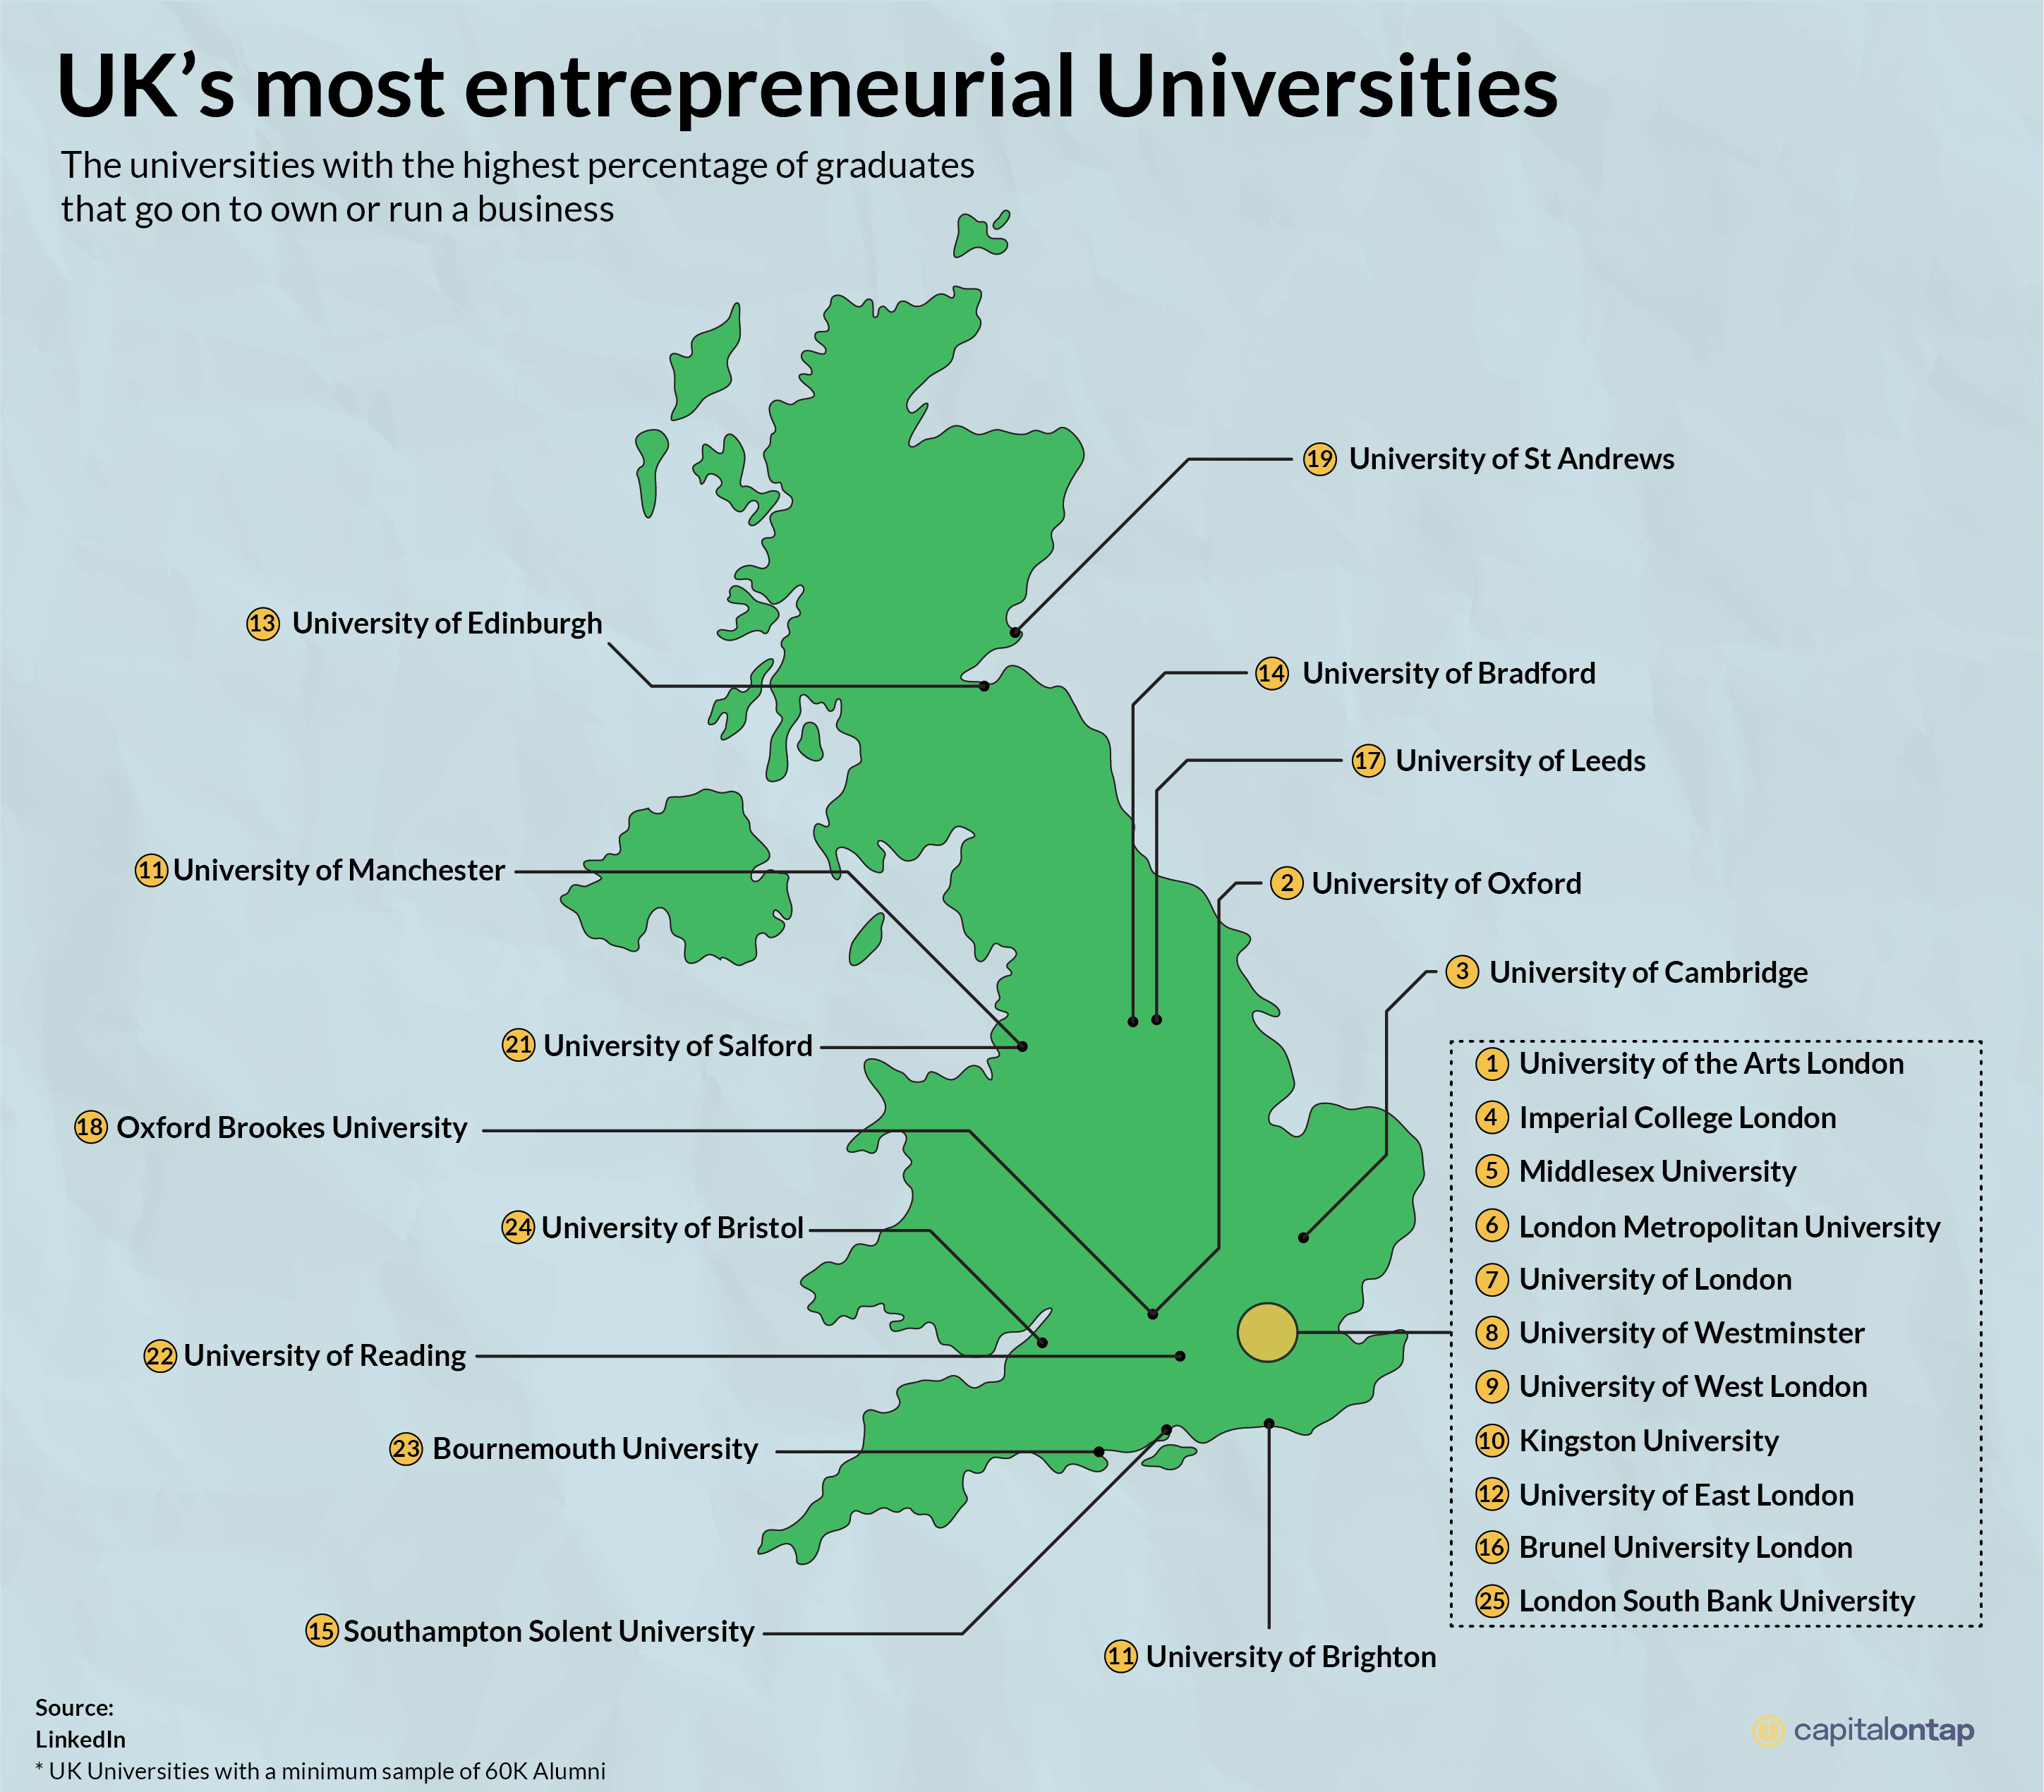 A map of the UK's most entrepreneurial universities